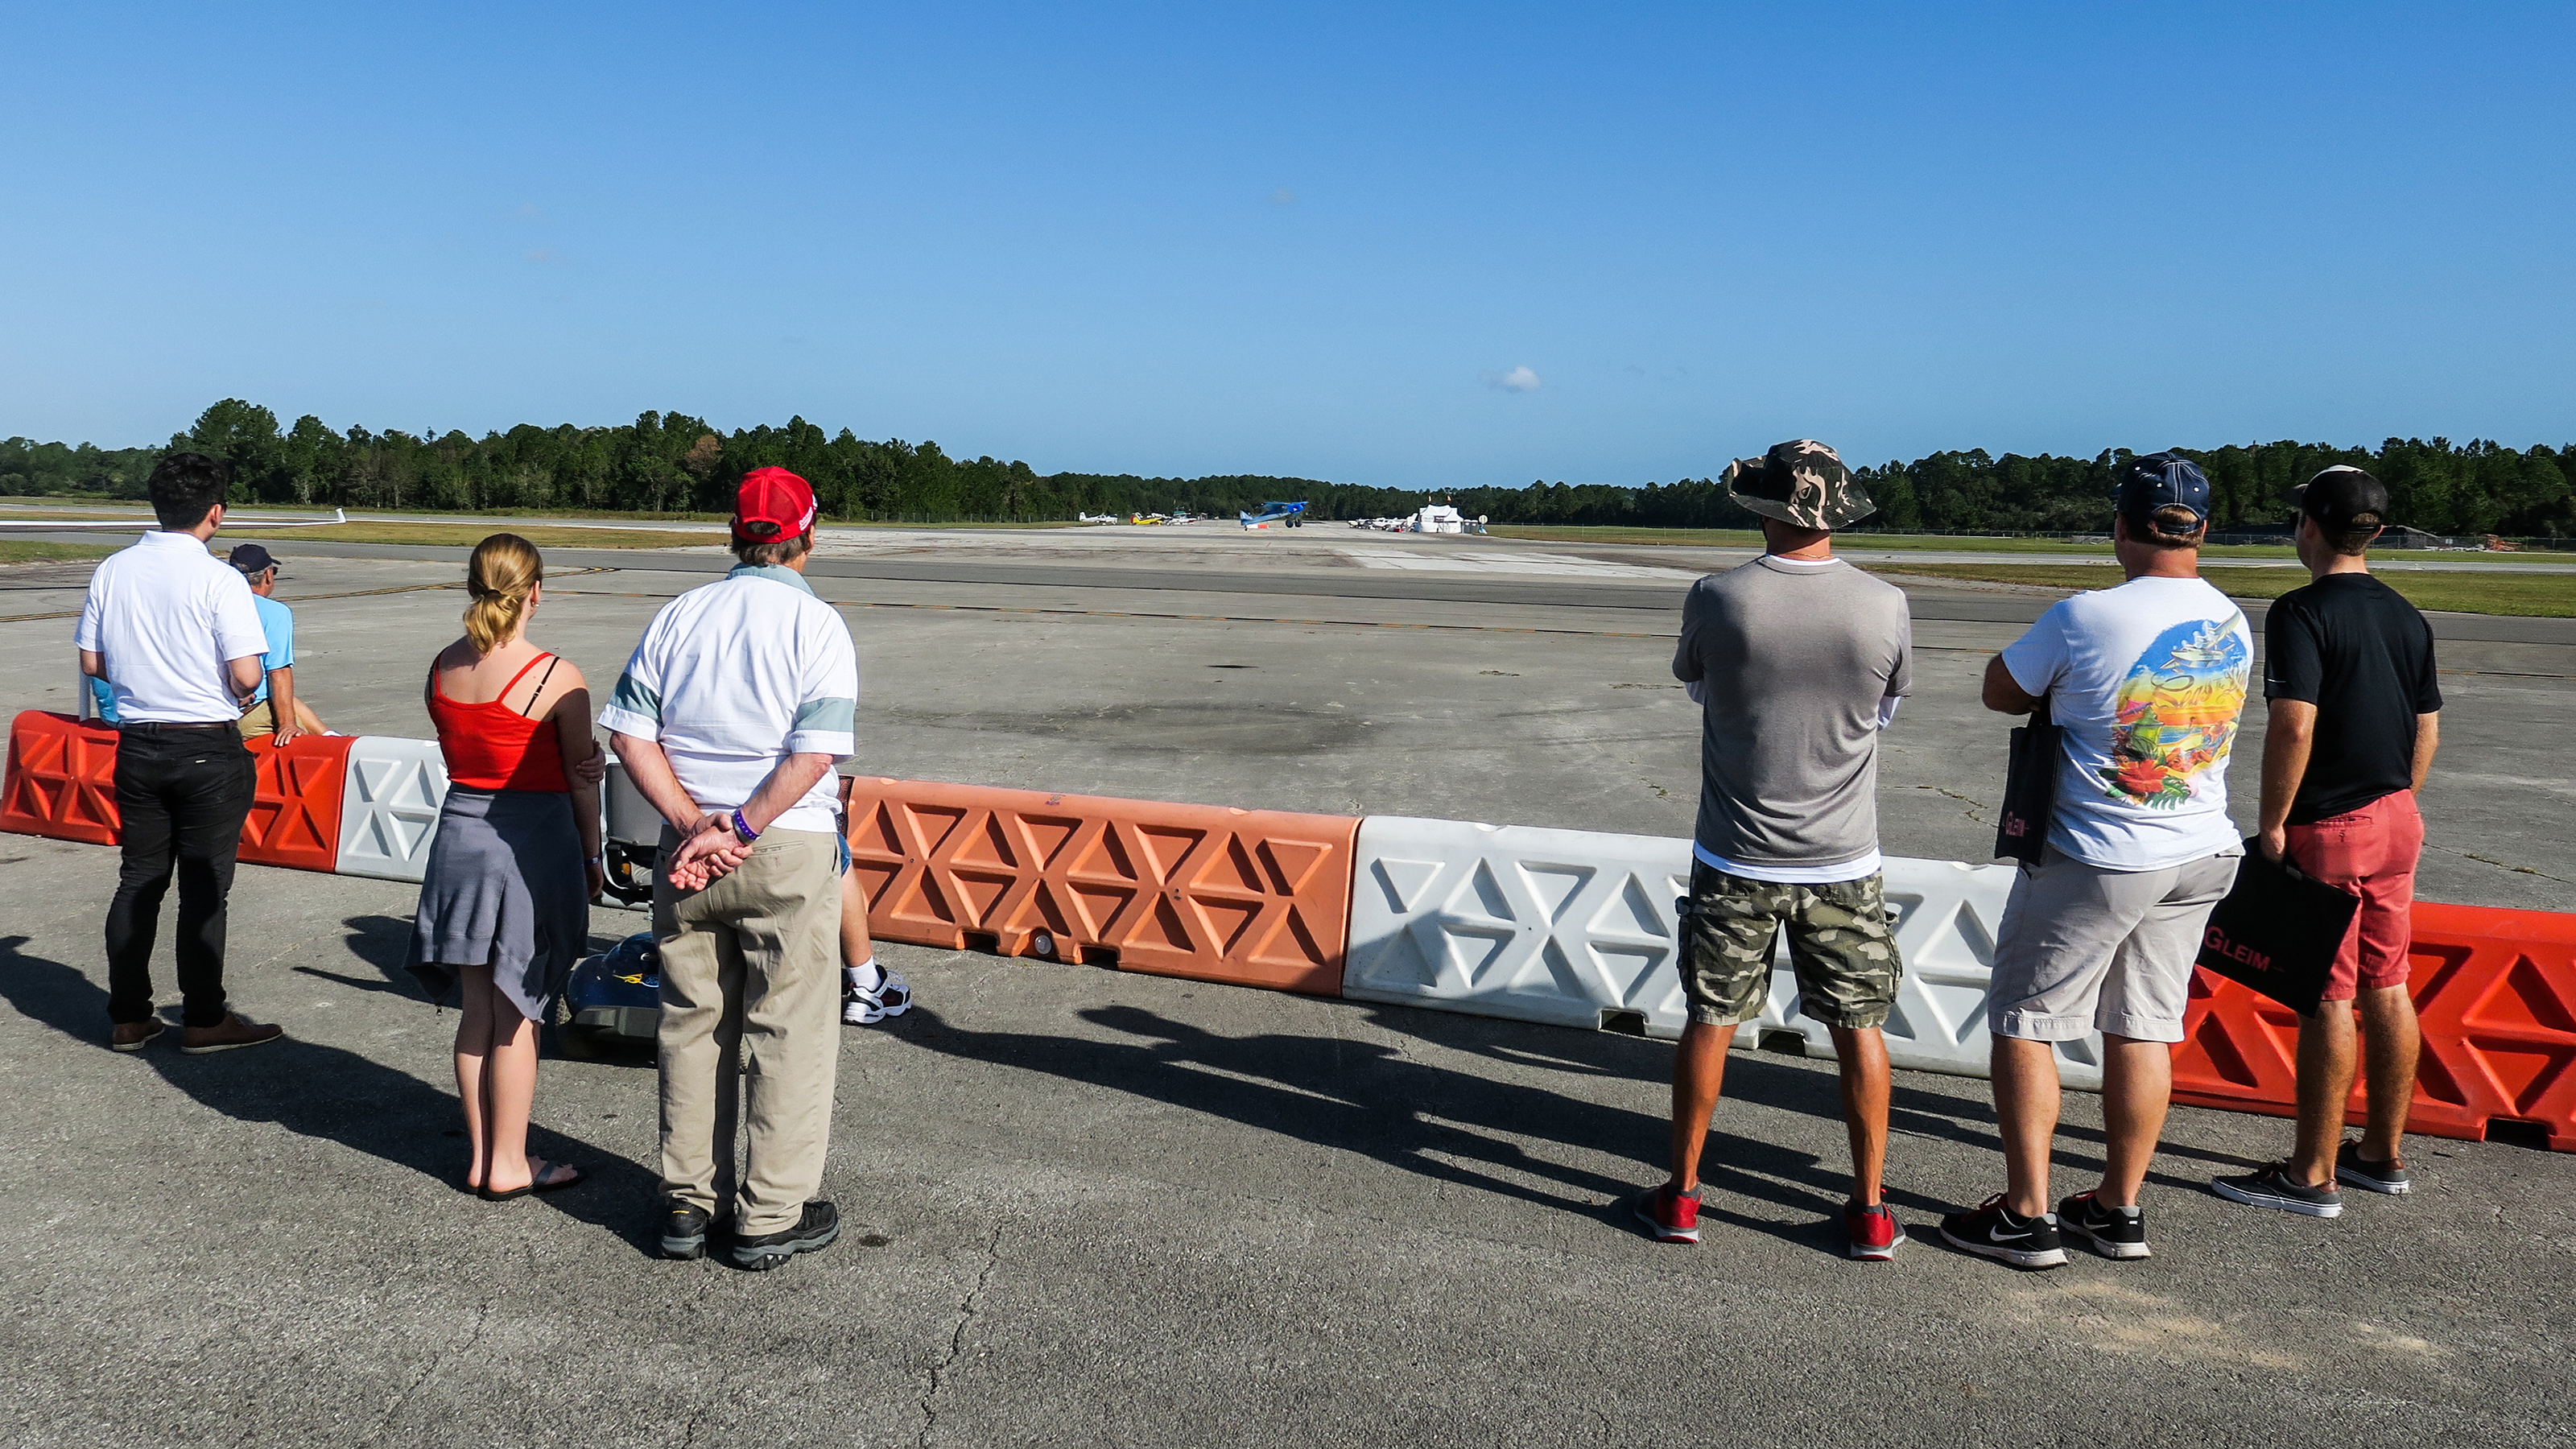 Audiences gather for one of many demo flights during the DeLand Sport Aviation Showcase. Photo by Alton Marsh.